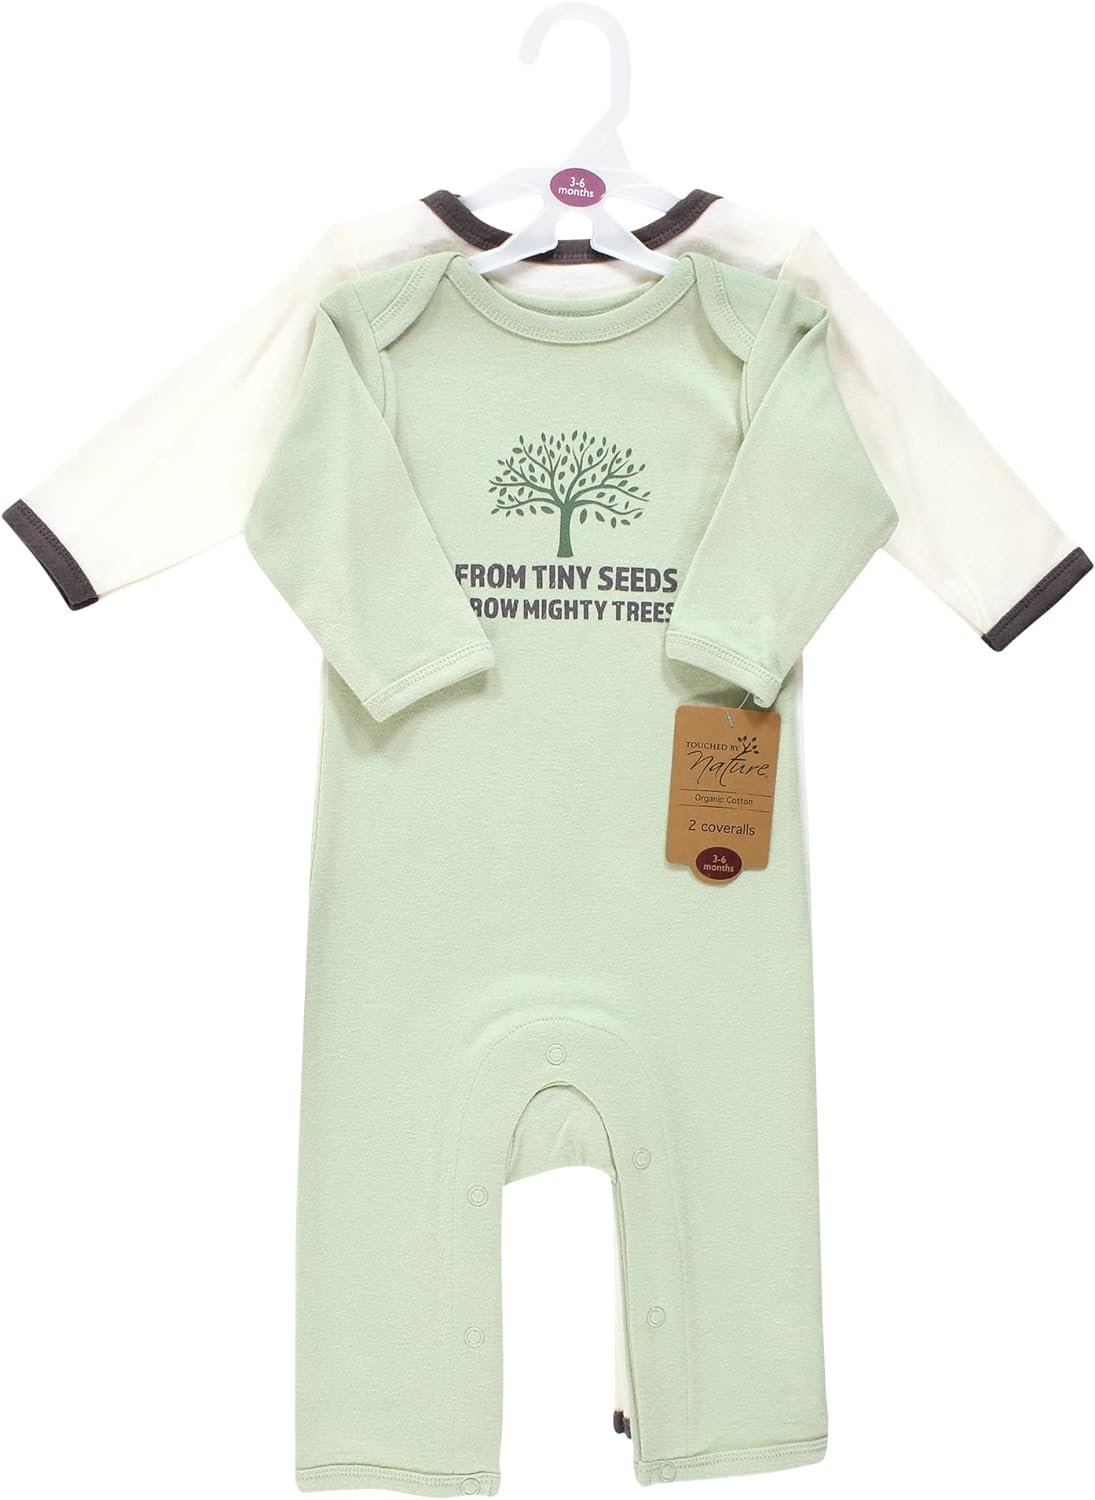 Touched by Nature Baby Boys’ Organic Cotton Coveralls Review